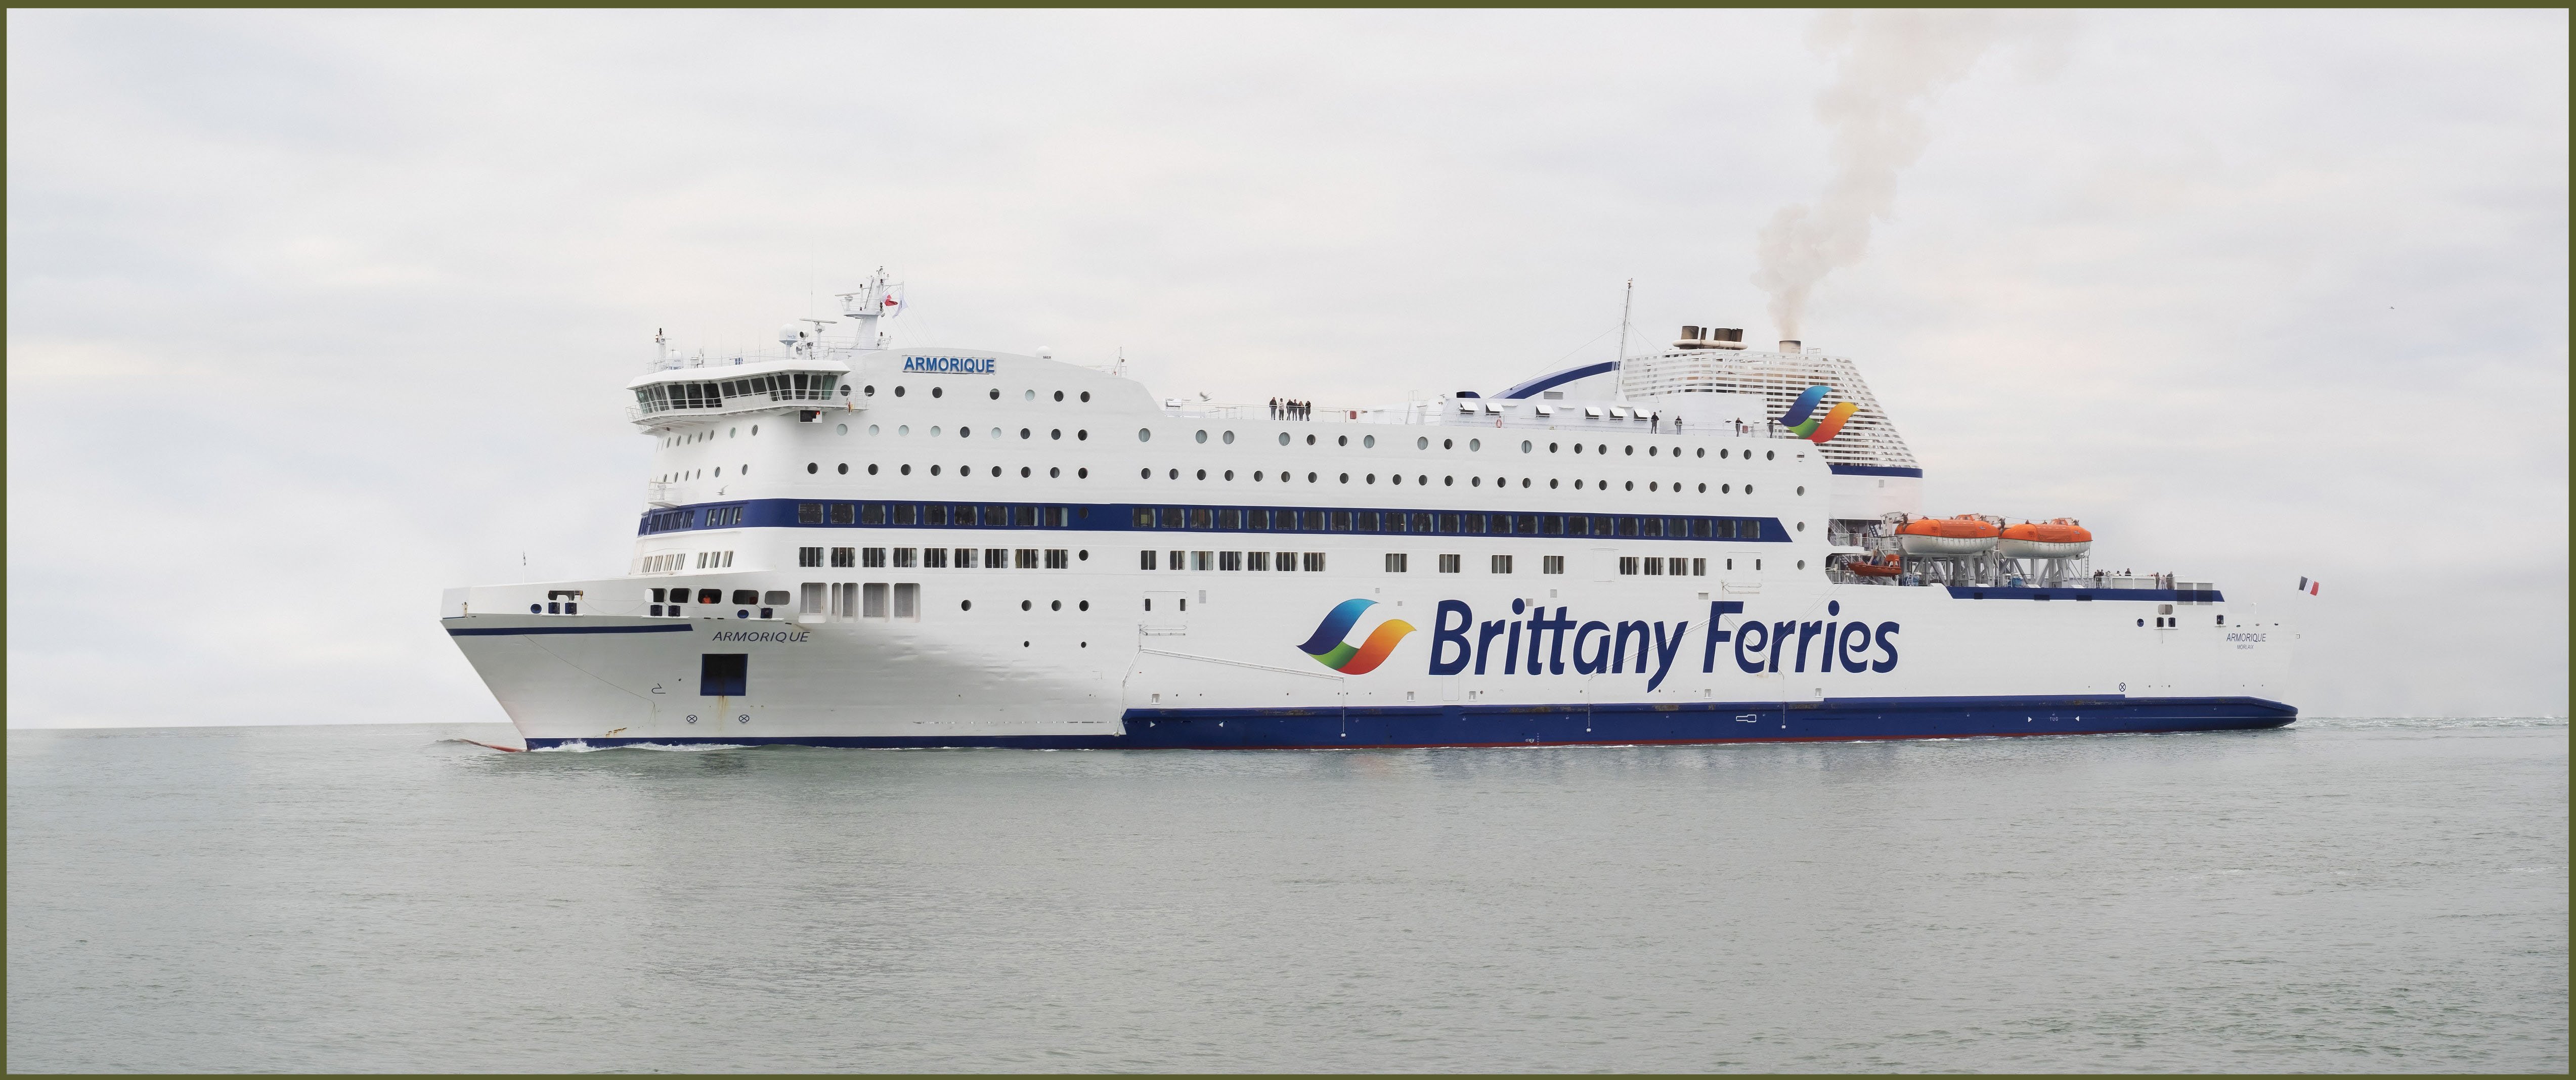 Brittany Ferry Armorique